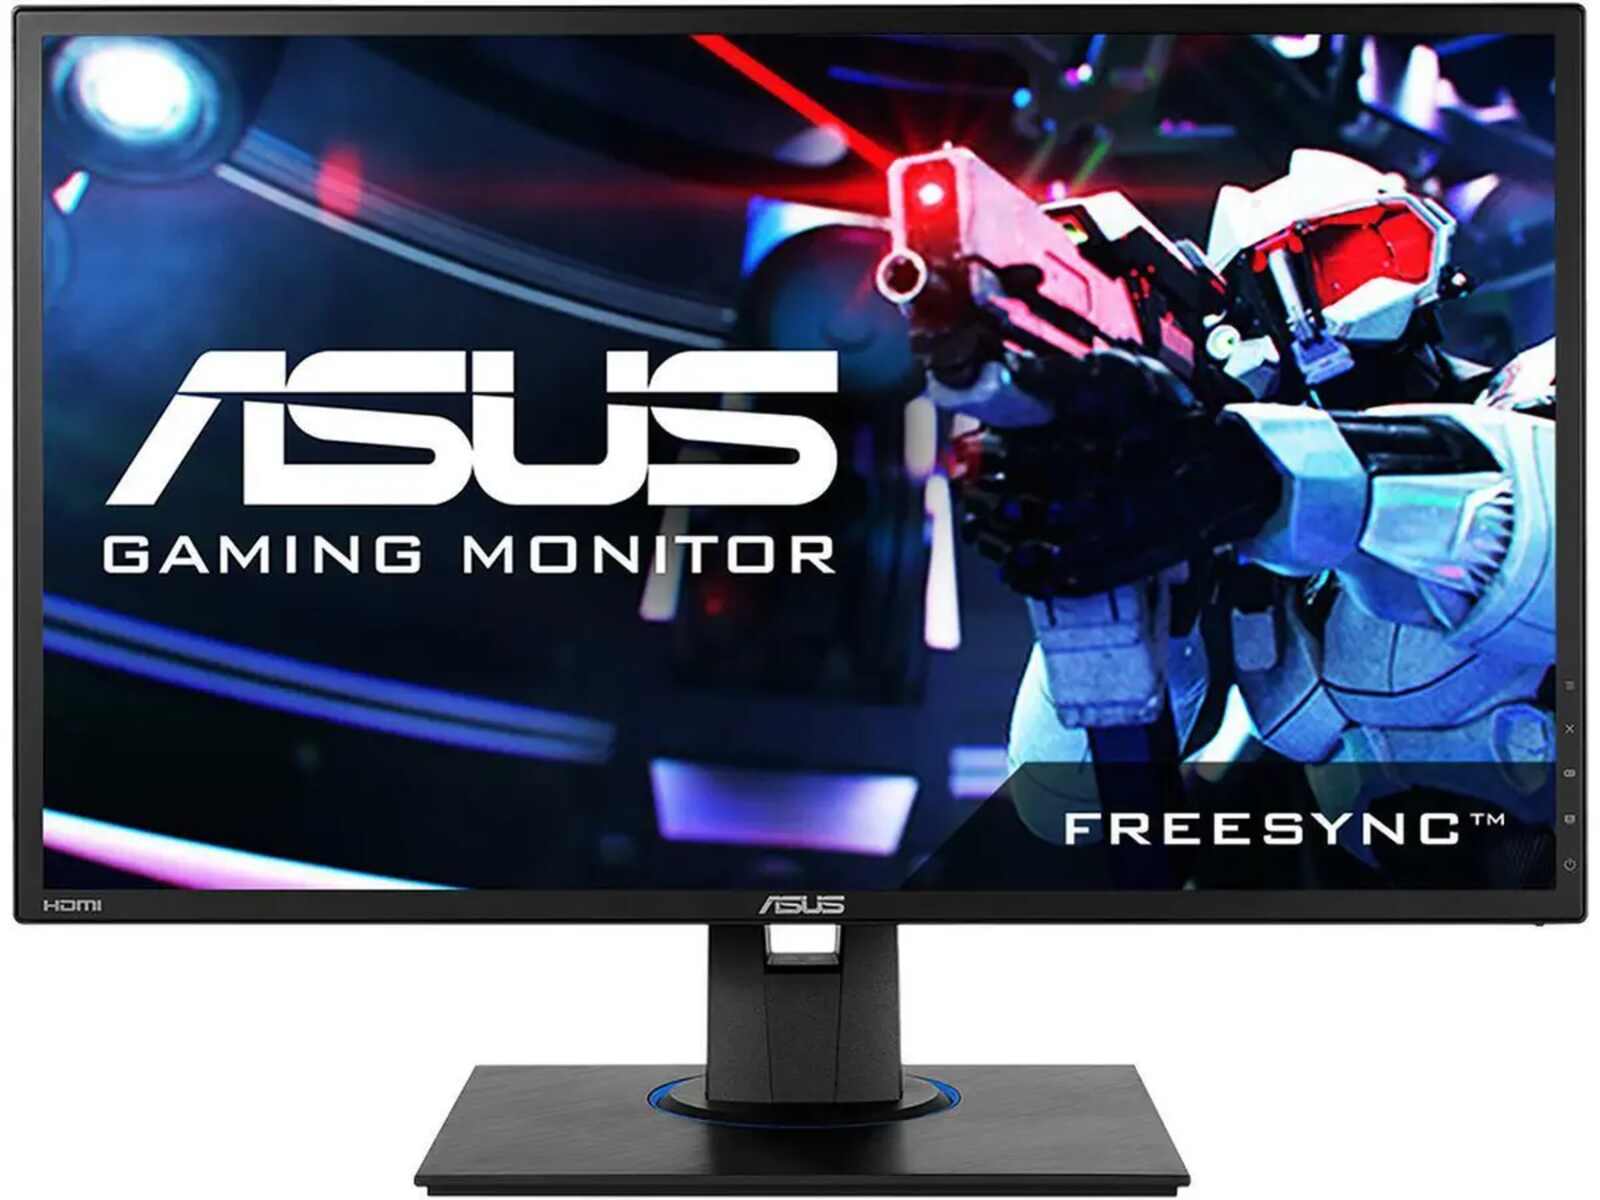 ASUS VG245H Gaming Monitor: How To Set Up For PS4